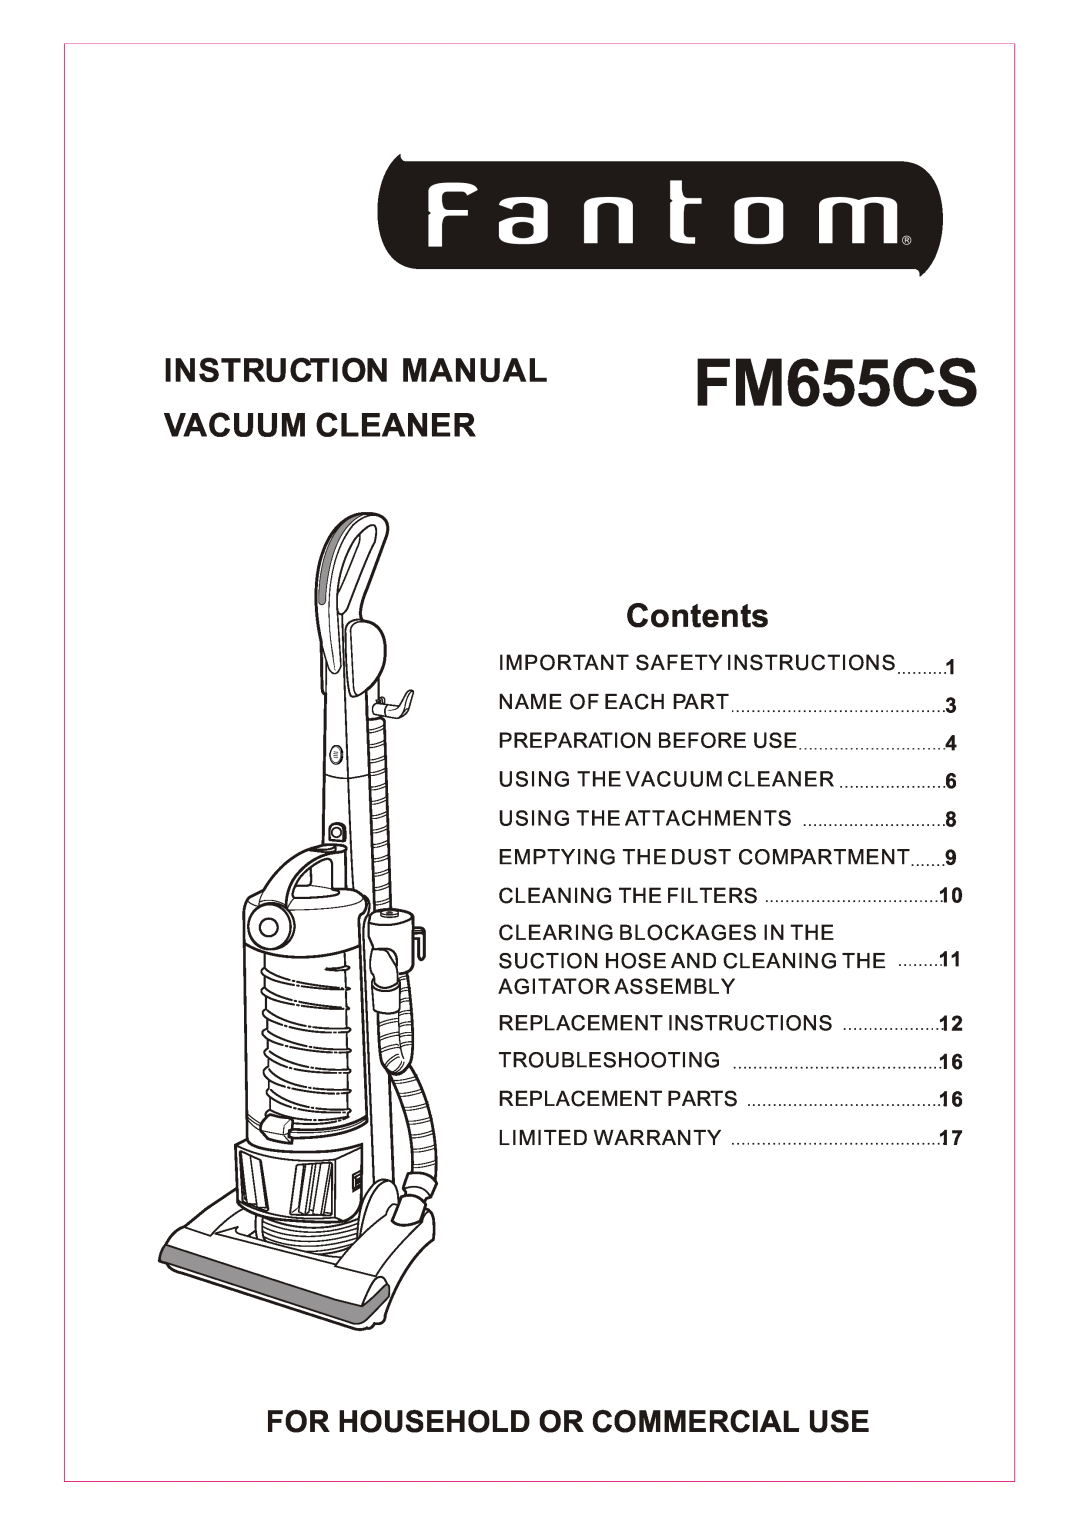 Fantom Vacuum FM655CS instruction manual VACUUM CLEANER Contents, For Household Or Commercial Use 